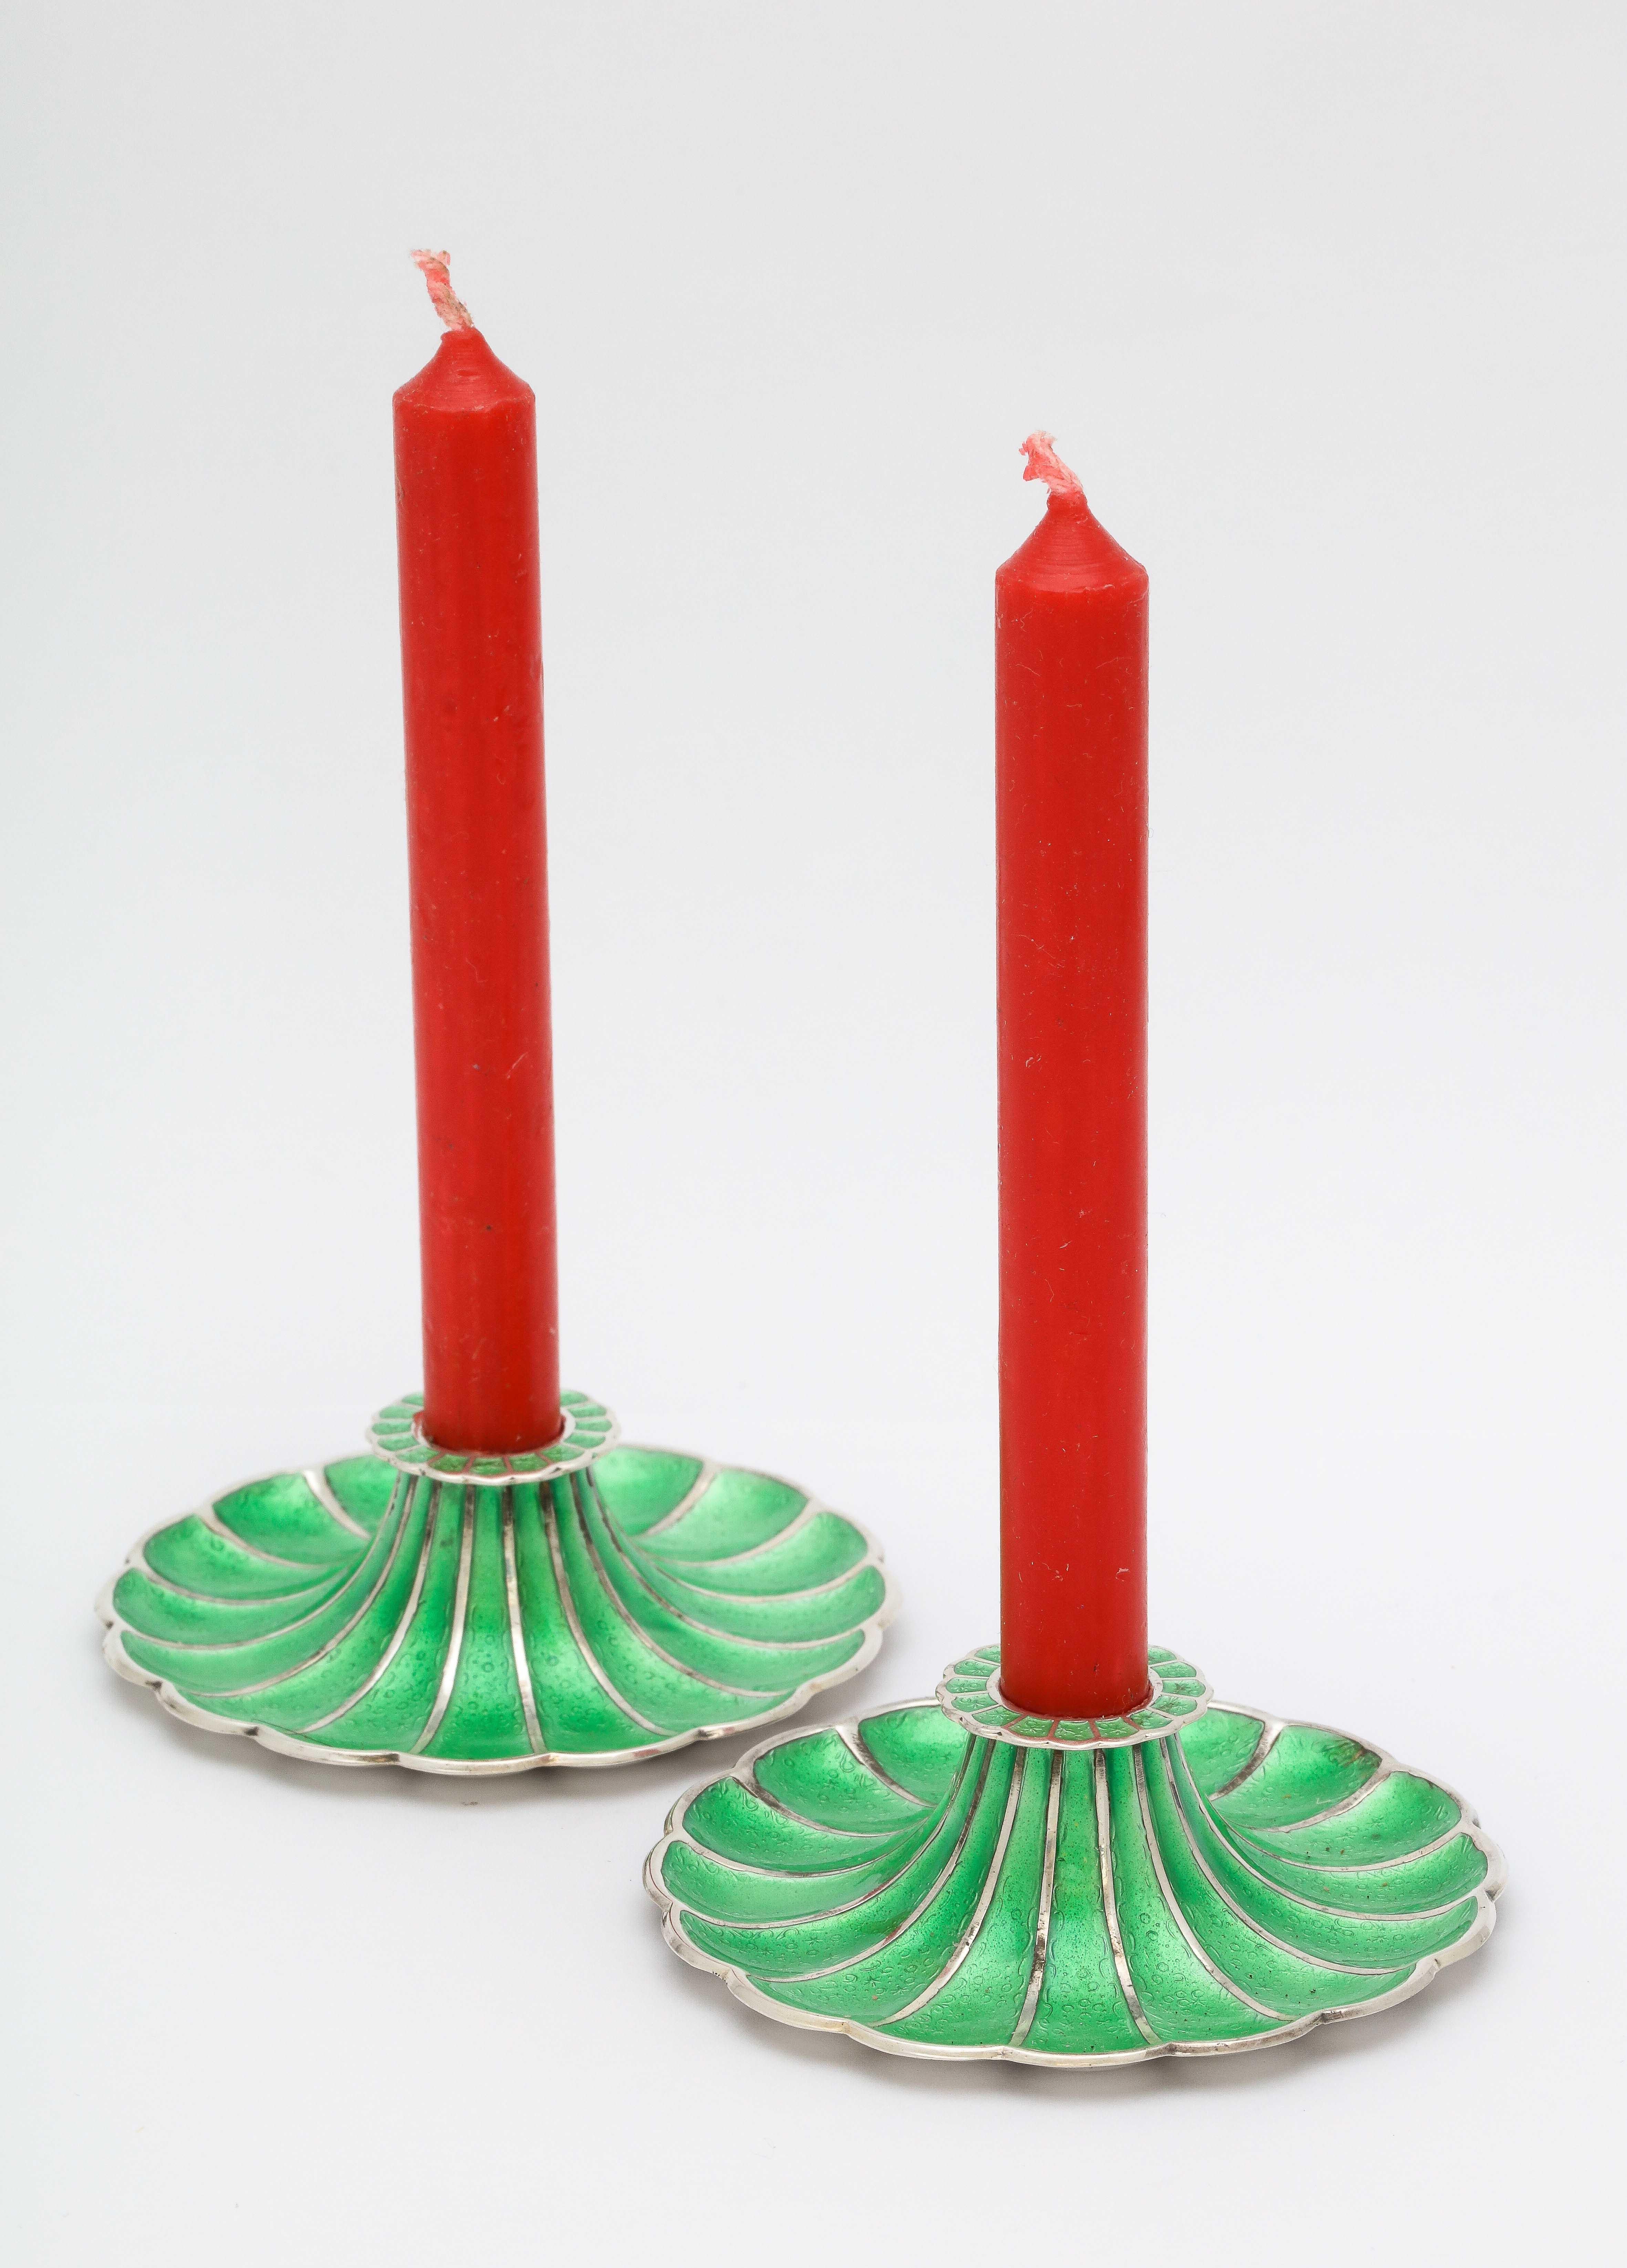 Mid-Century Modern pair of sterling silver and green enamel flower - form candlesticks, Denmark, circa 1960s, Meka of Holte - makers. Graceful design. Each measures 2 3/4 inches diameter x 1 inch high. Not weighted. The pair weighs 2.2 troy ounces.